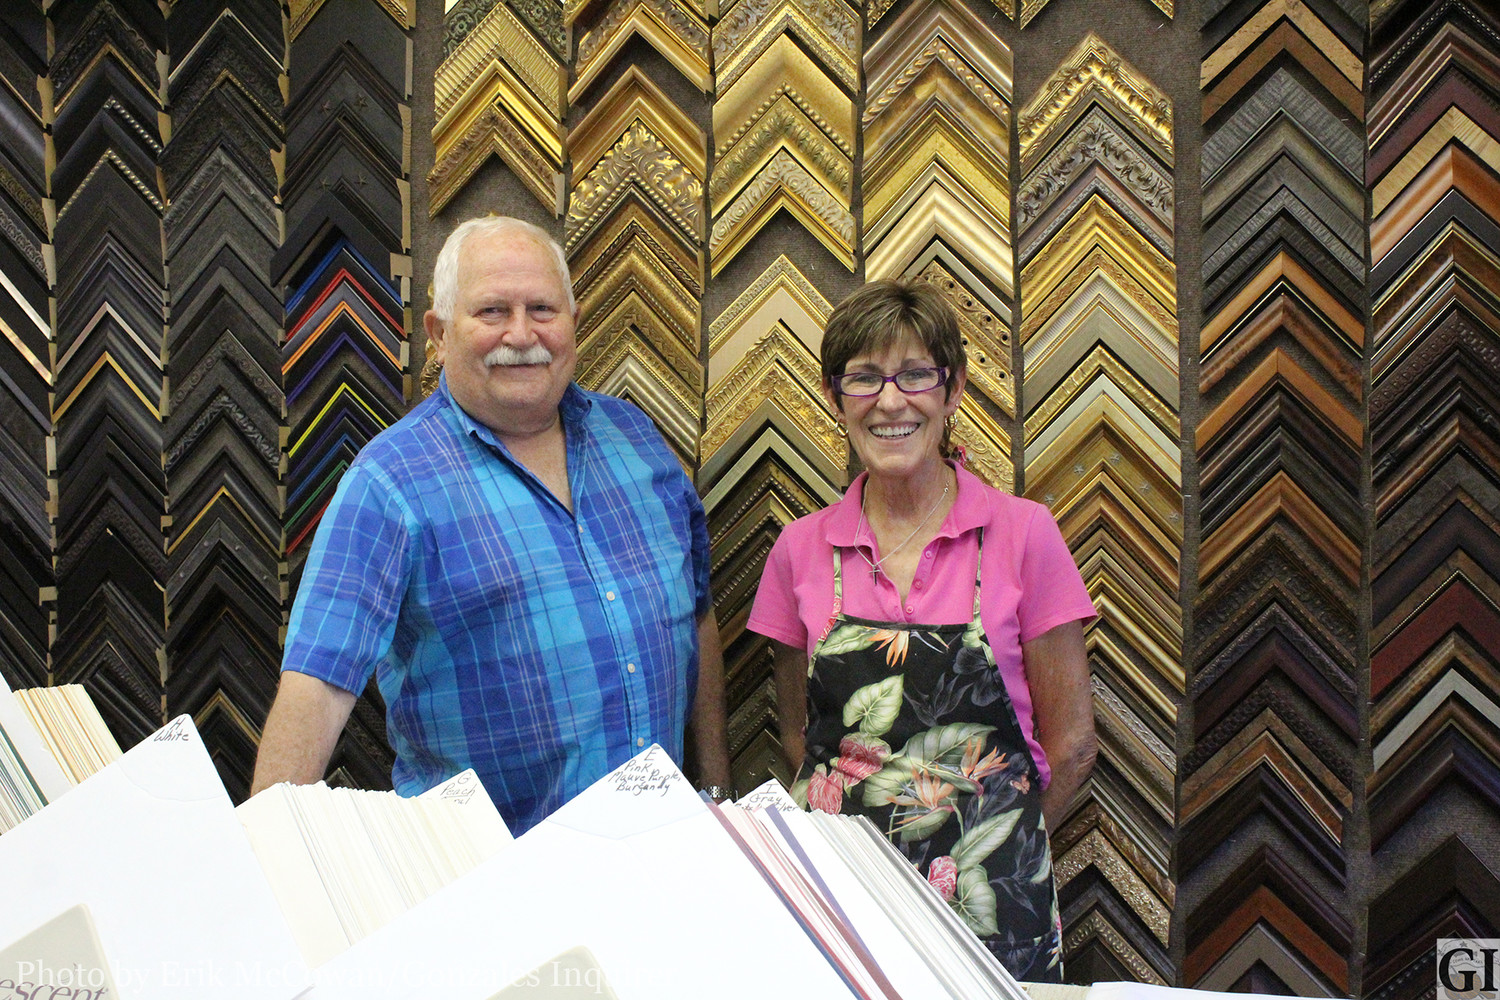 Elgin Heinemeyer (left) and Terry Towns (right) have been business partners at Frames and Things for over 16 years, providing quality custom picture framing for Gonzales County.